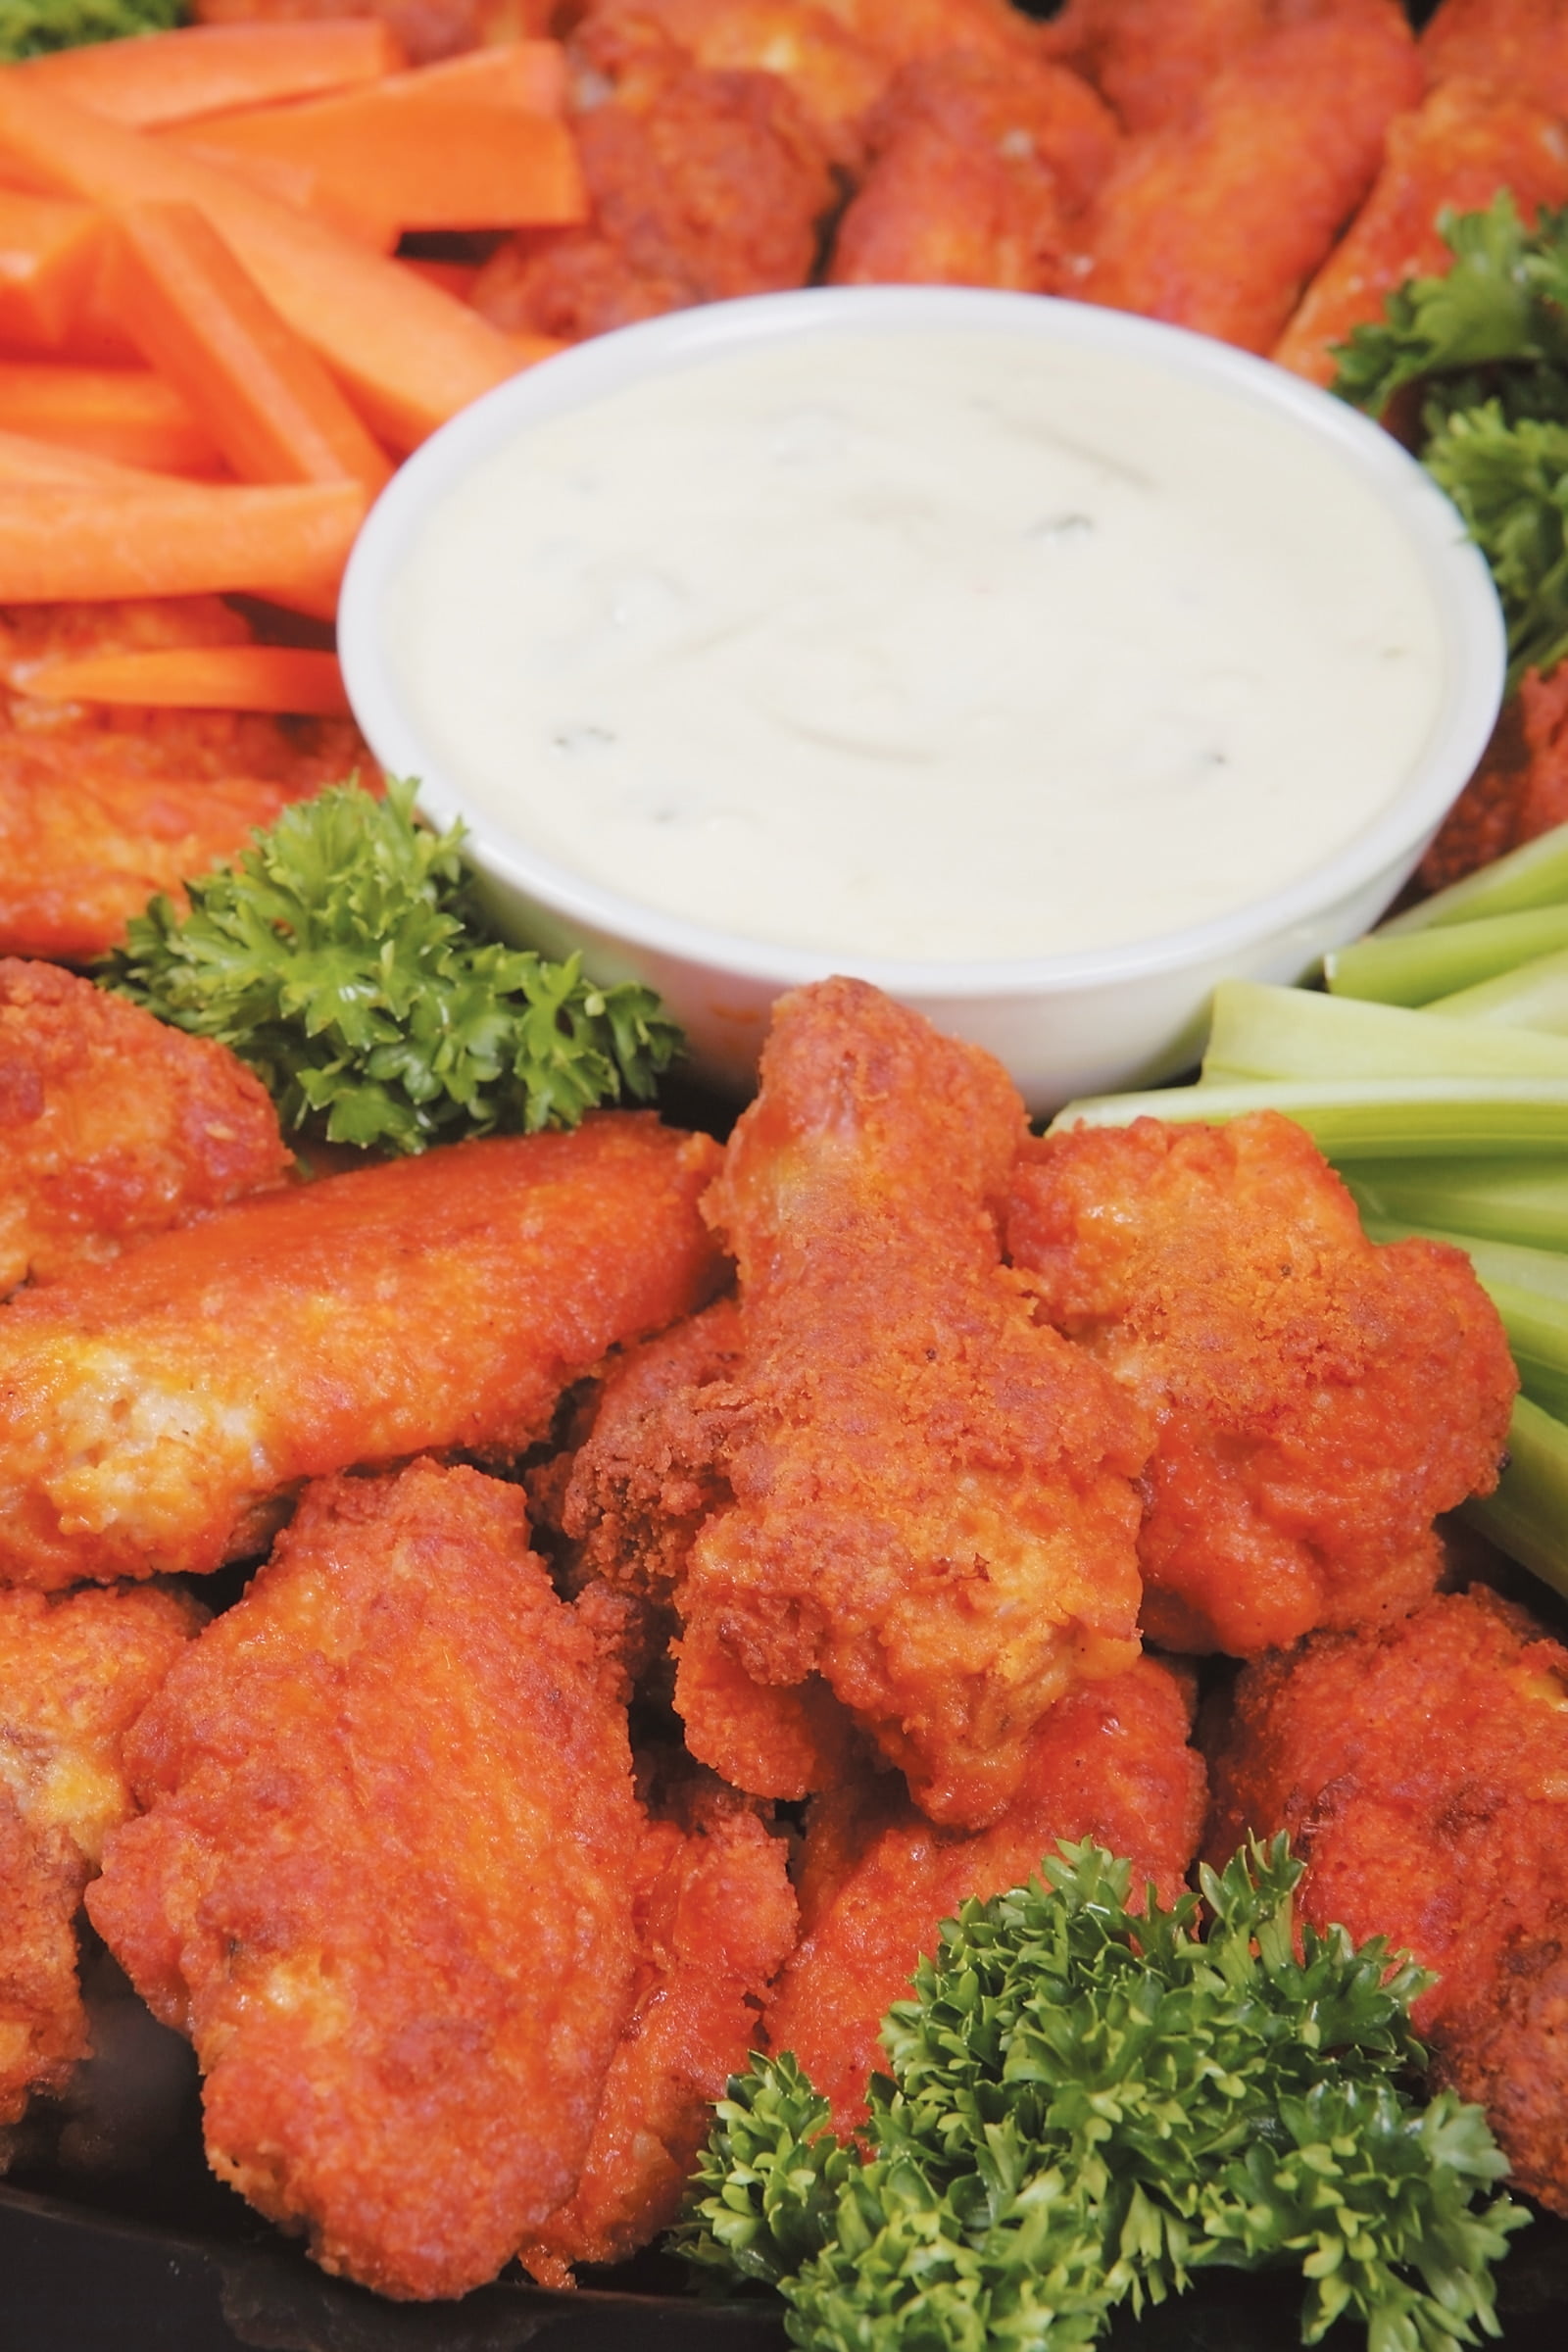 Buffalo Chicken Wings Food Picture